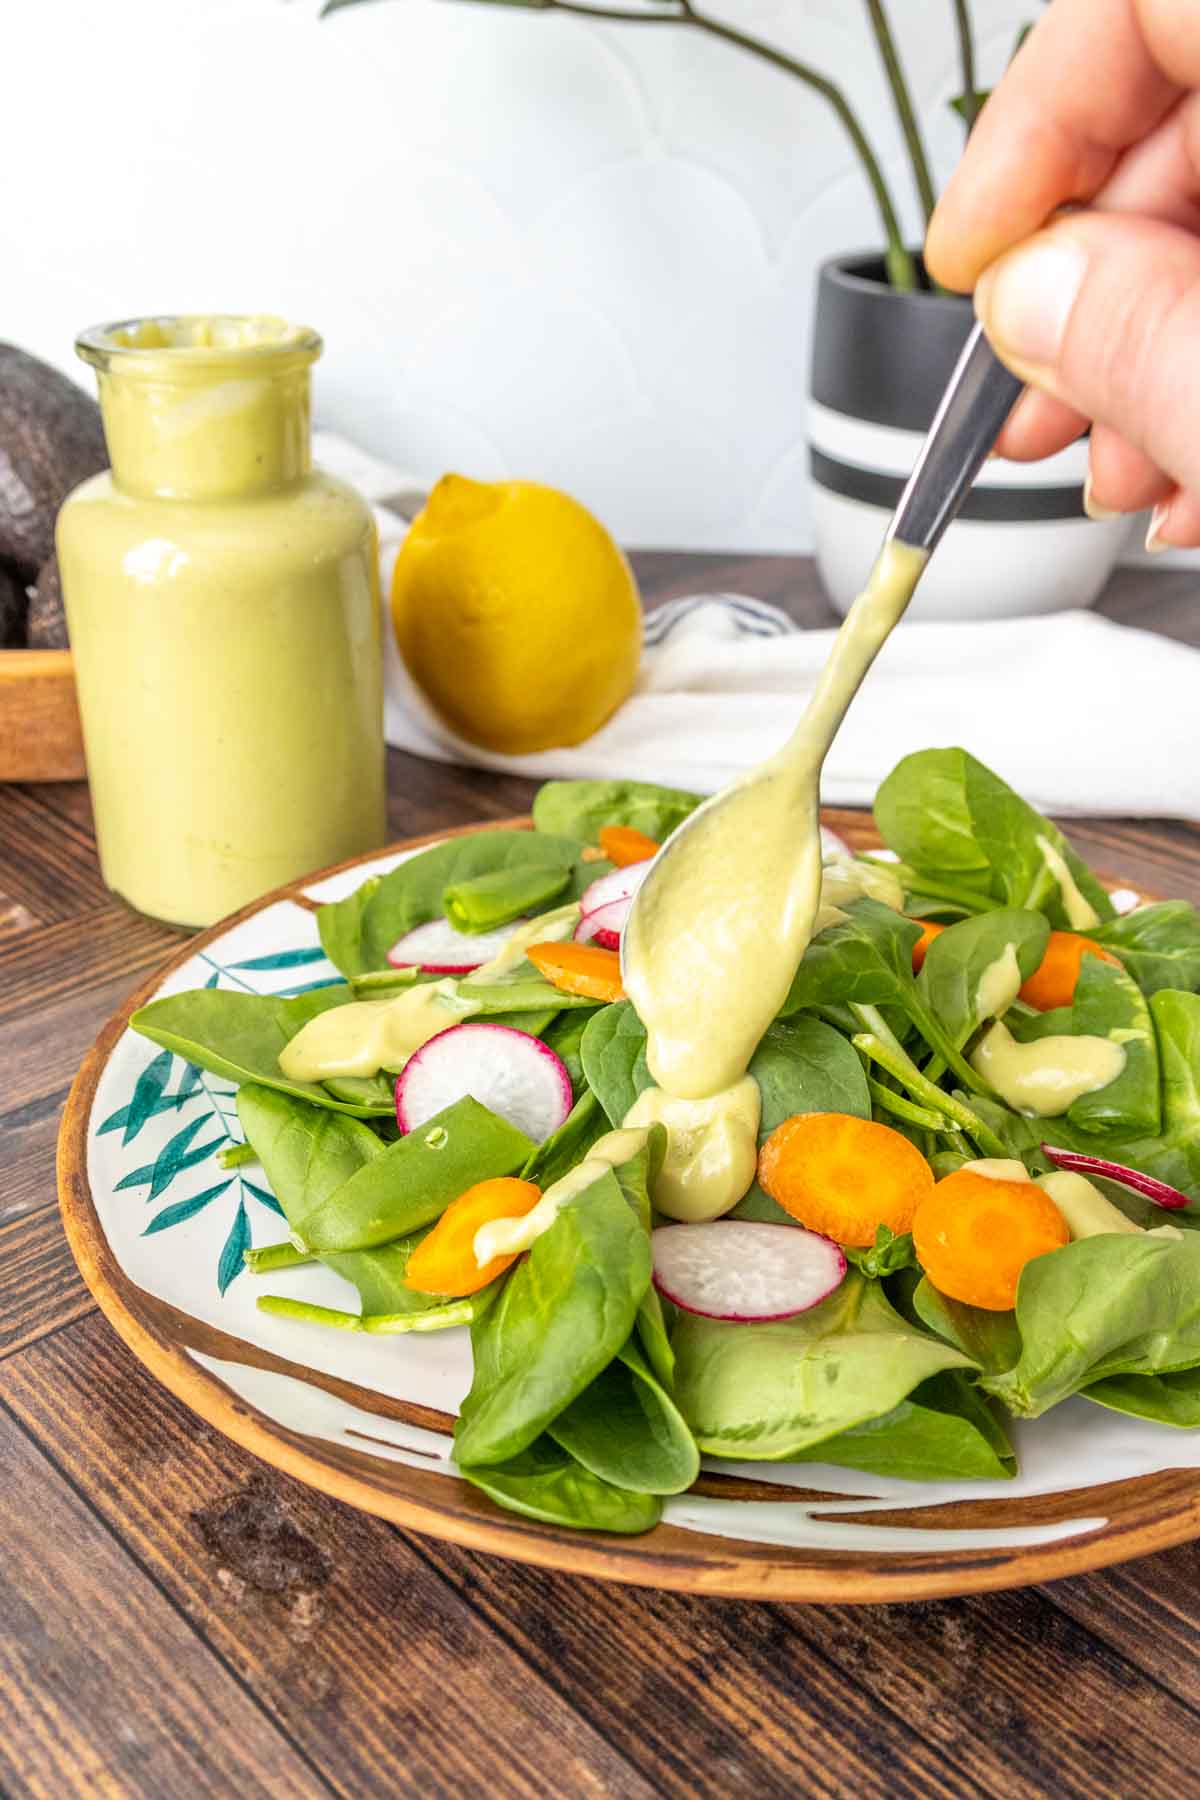 Dolloping avocado dressing on a spinach salad.